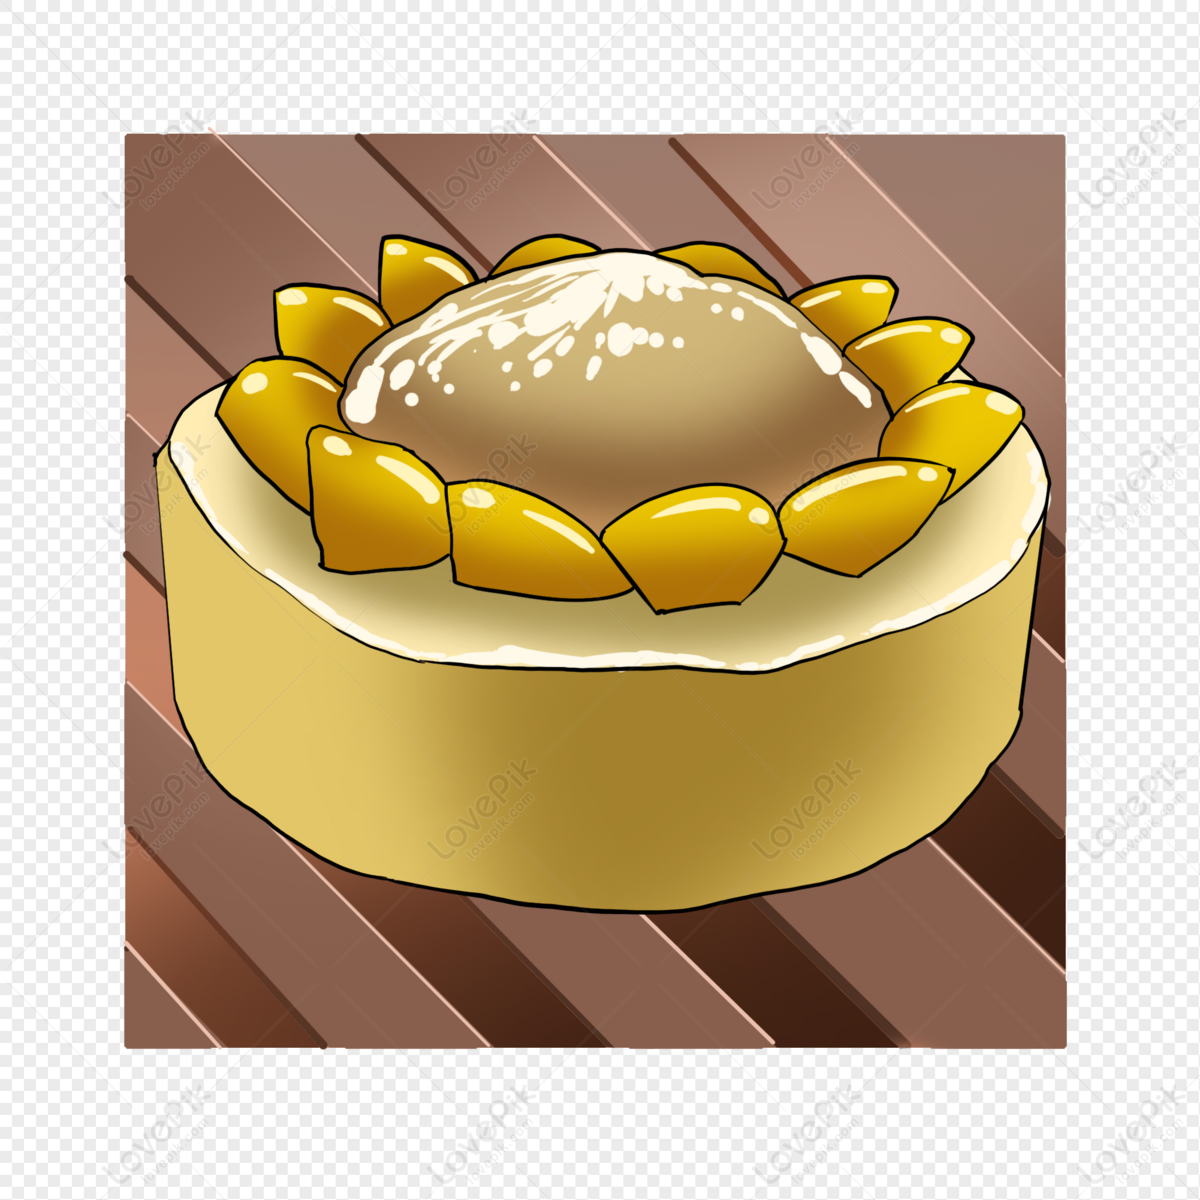 Mango Feast Cake PNG White Transparent And Clipart Image For Free ...